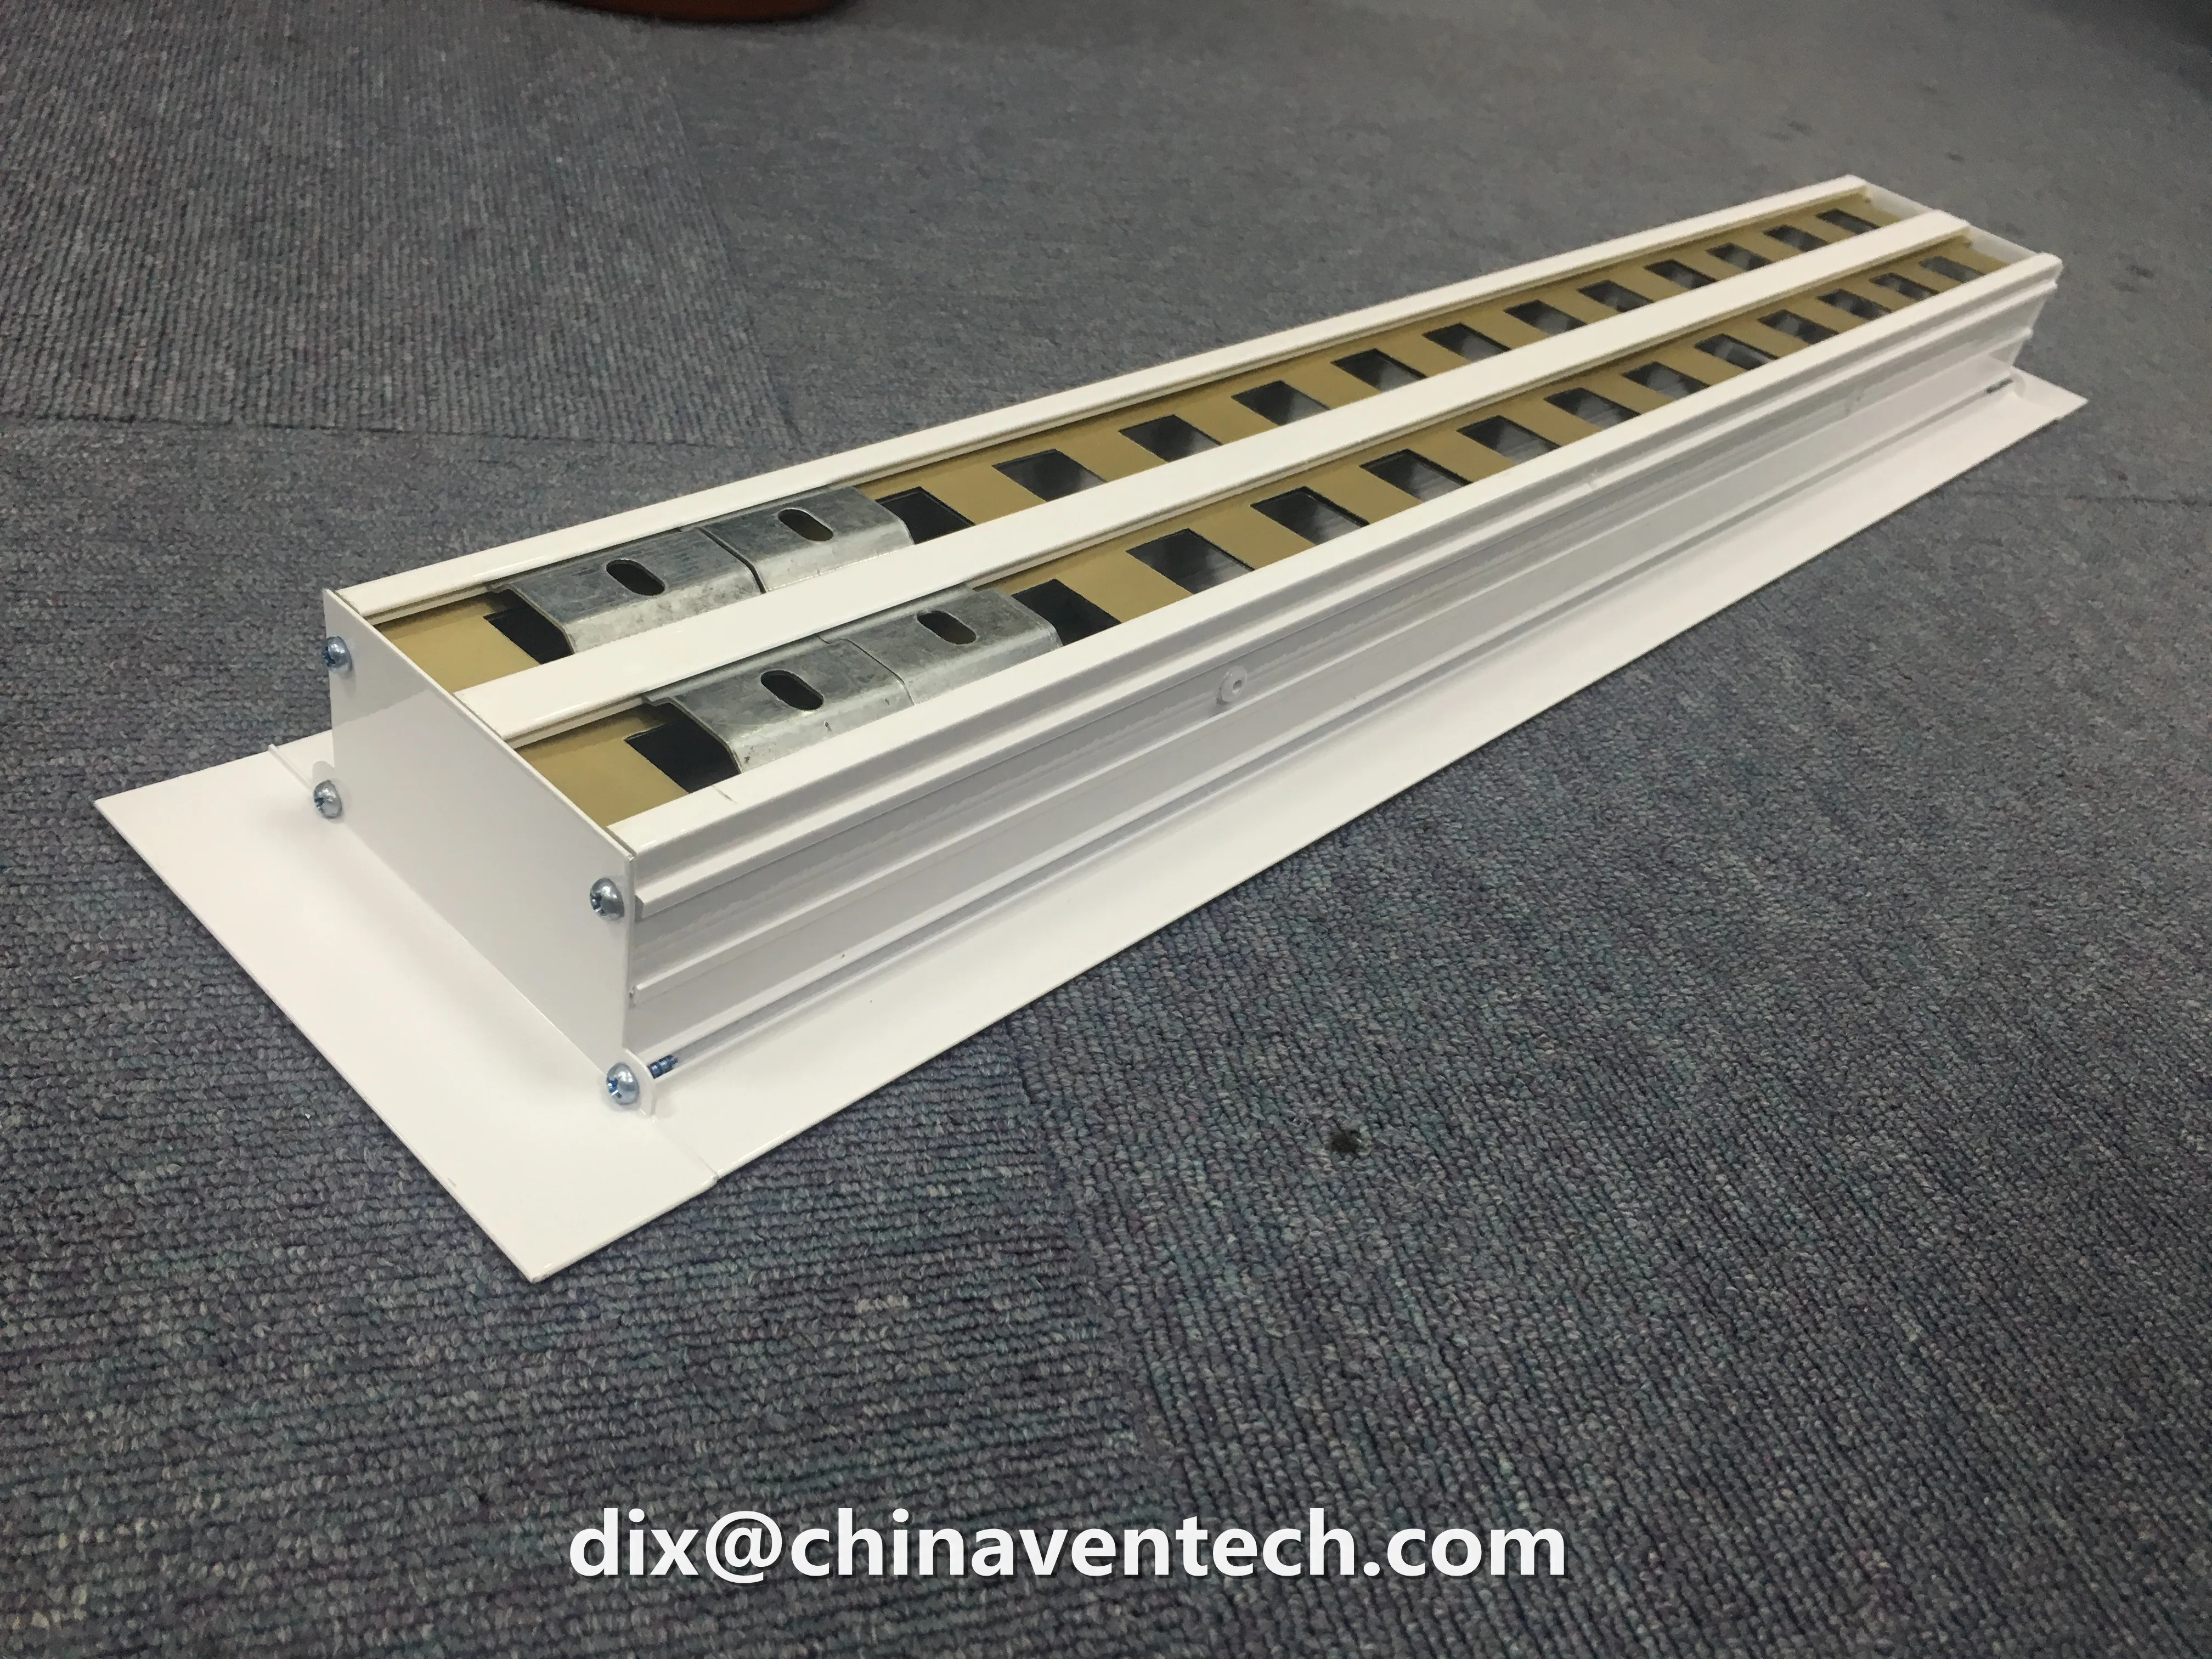 Aluminum Ventilation Supply & Return Air Ceiling Mounted Linear Slot Diffuser with Adjustable Deflector Blades